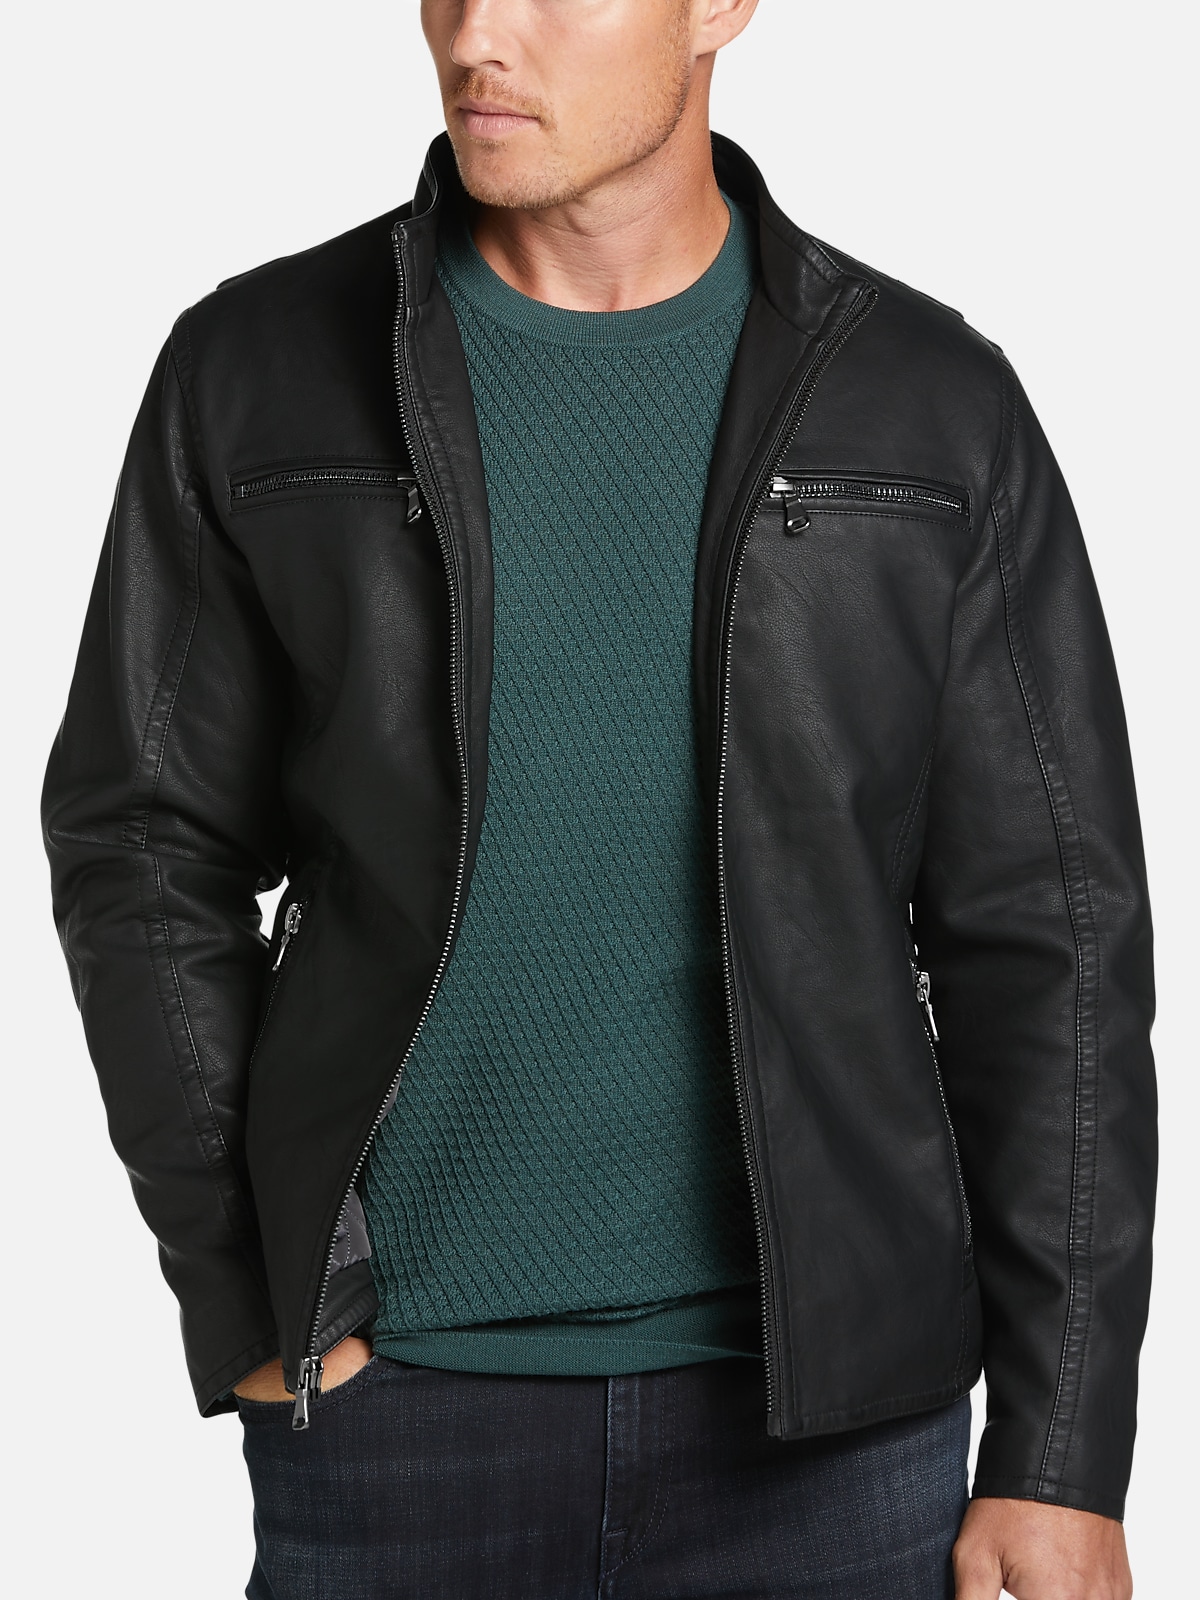 Awearness Kenneth Cole Modern Fit Faux Leather Jacket | All Sale| Men's ...